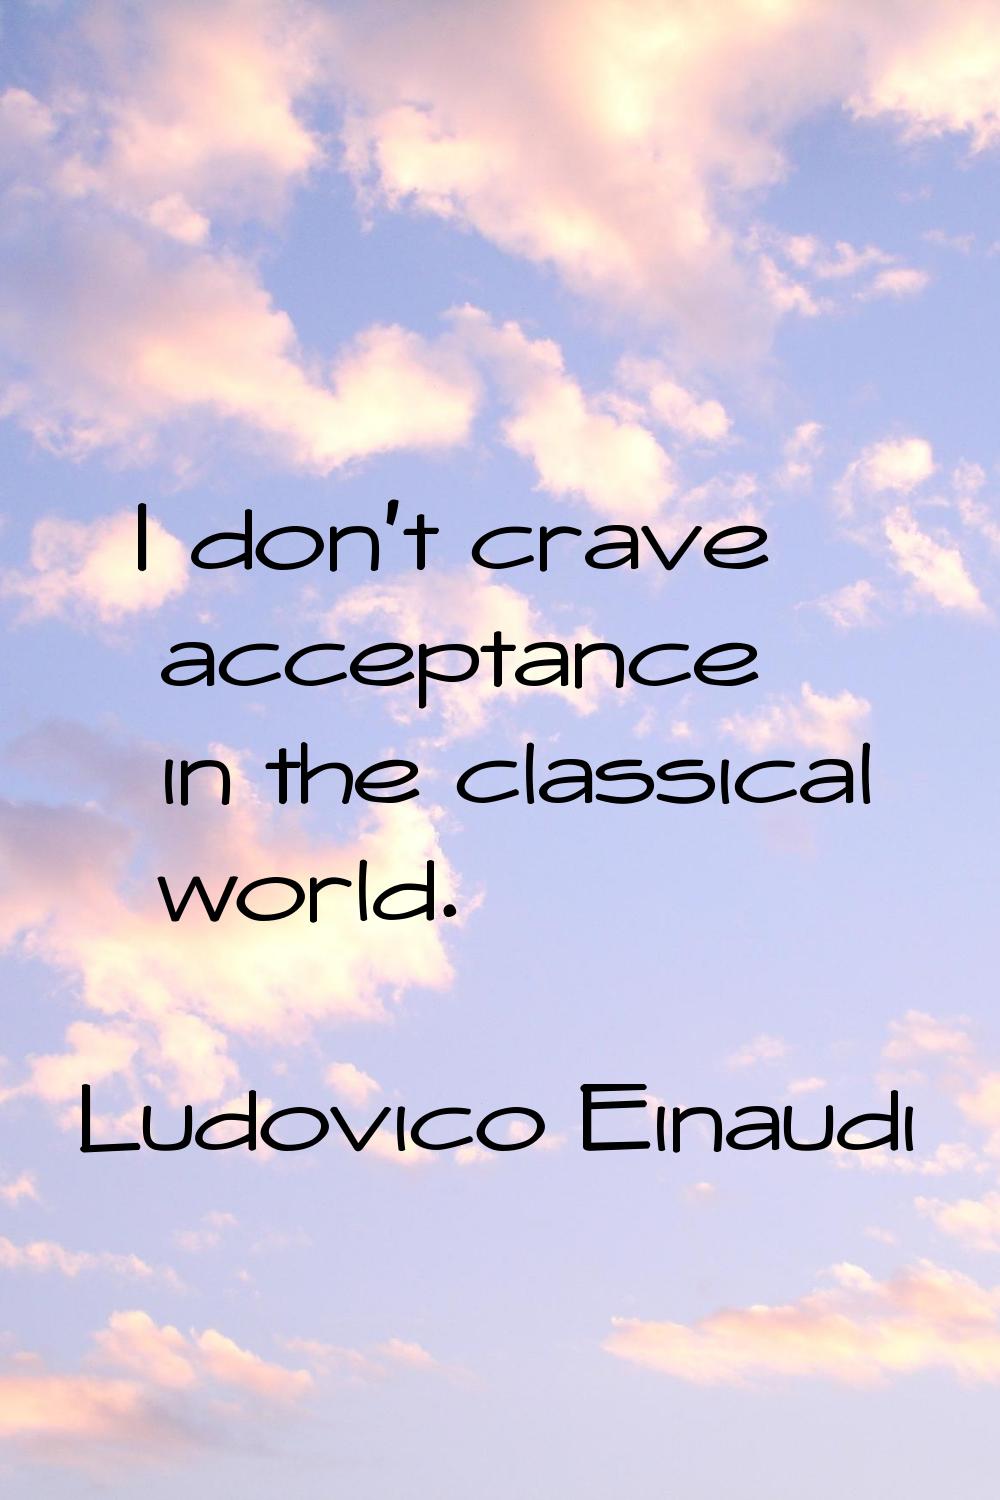 I don't crave acceptance in the classical world.